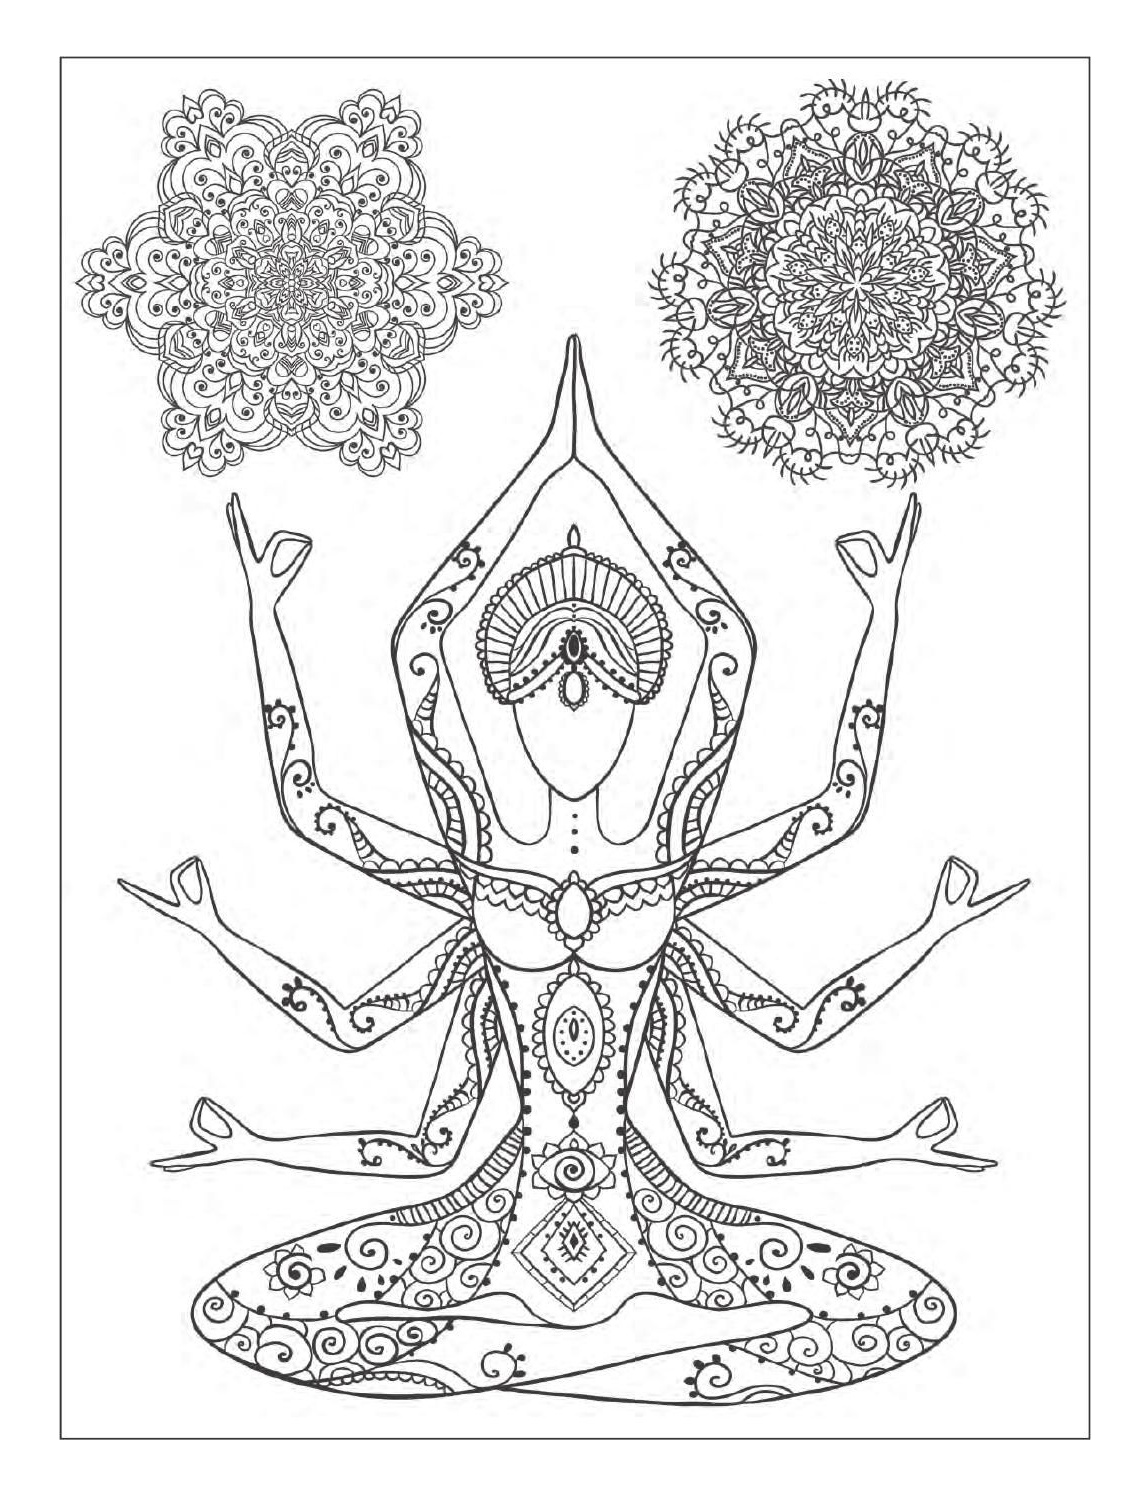 Mandala Dessin Bestof Photos Yoga and Meditation Coloring Book for Adults with Yoga